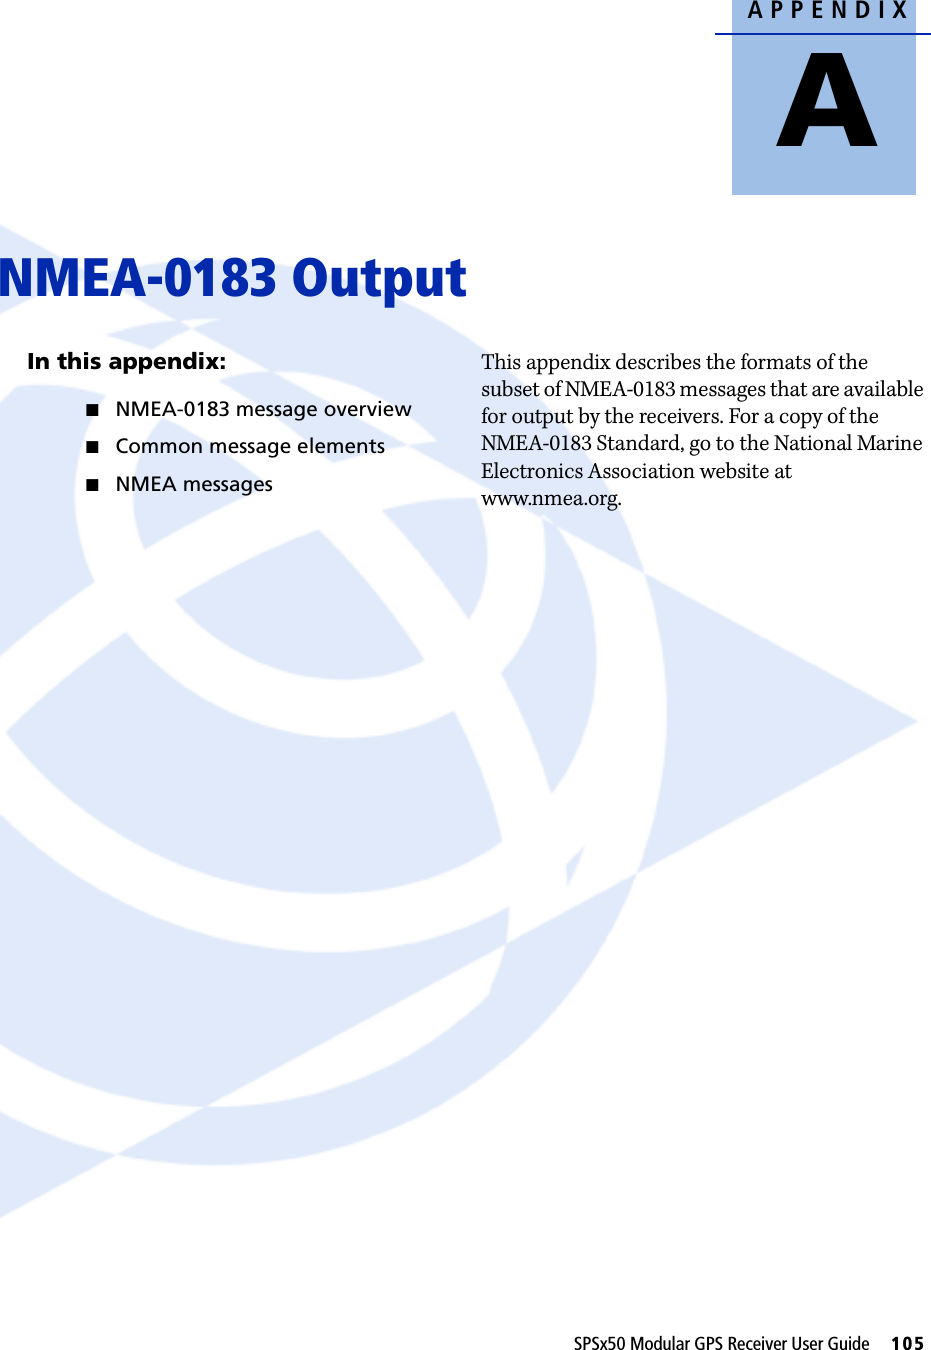 APPENDIXASPSx50 Modular GPS Receiver User Guide     105NMEA-0183 Output AIn this appendix:QNMEA-0183 message overviewQCommon message elementsQNMEA messagesThis appendix describes the formats of the subset of NMEA-0183 messages that are available for output by the receivers. For a copy of the NMEA-0183 Standard, go to the National Marine Electronics Association website at www.nmea.org.